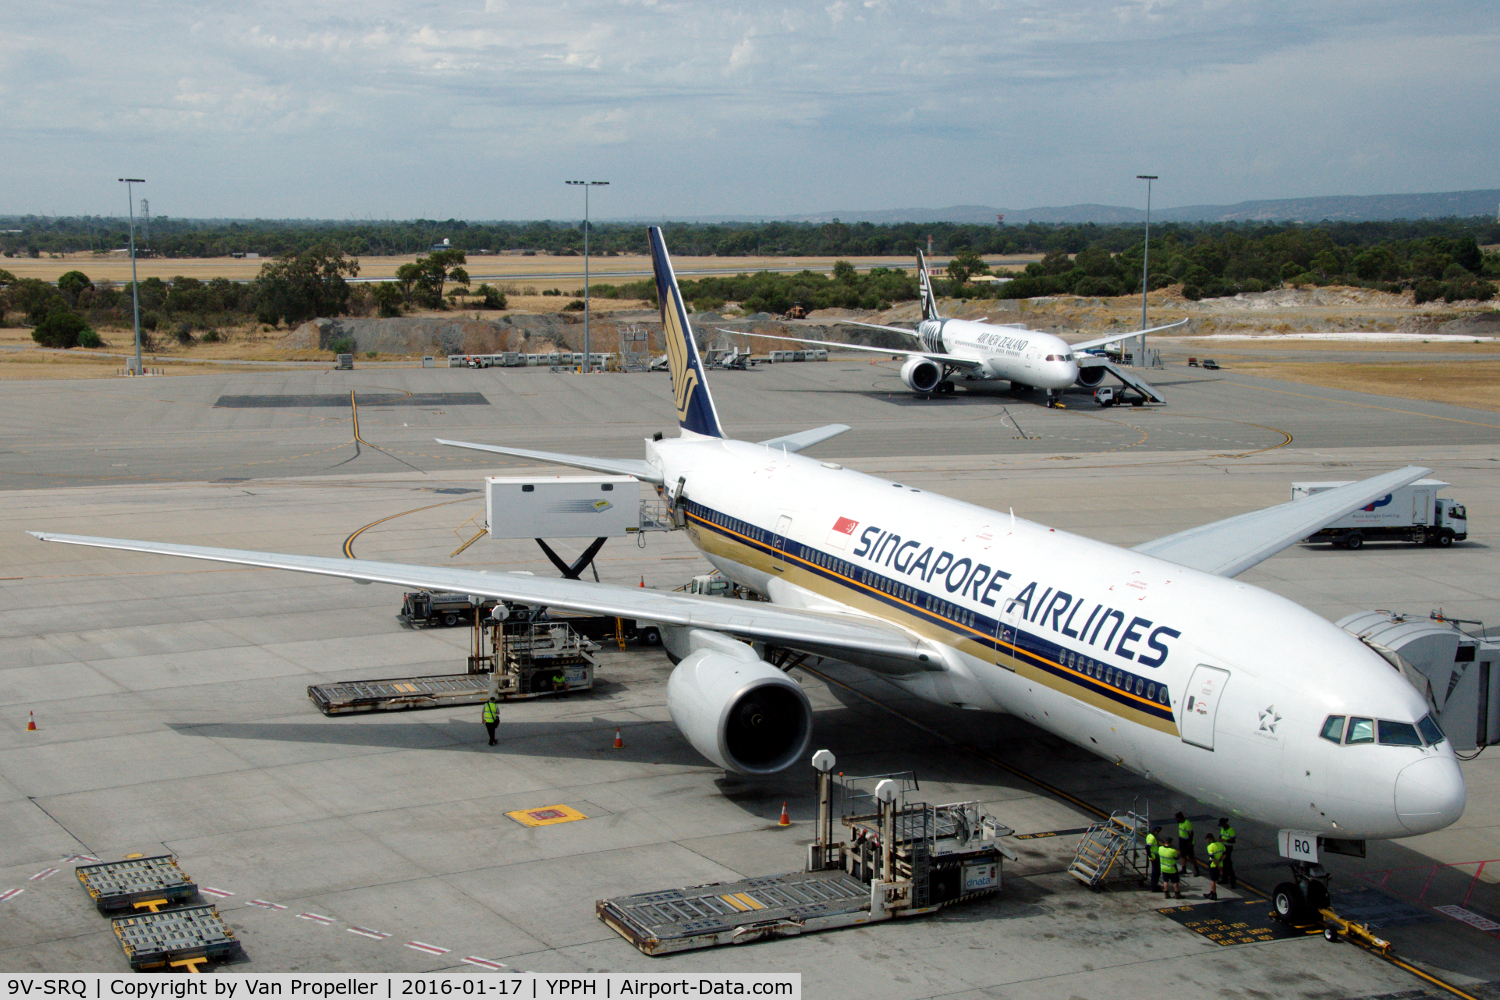 9V-SRQ, 2003 Boeing 777-212/ER C/N 33371, Boeing 777-212 of Singapore Airlines at Perth airport, Western Australia